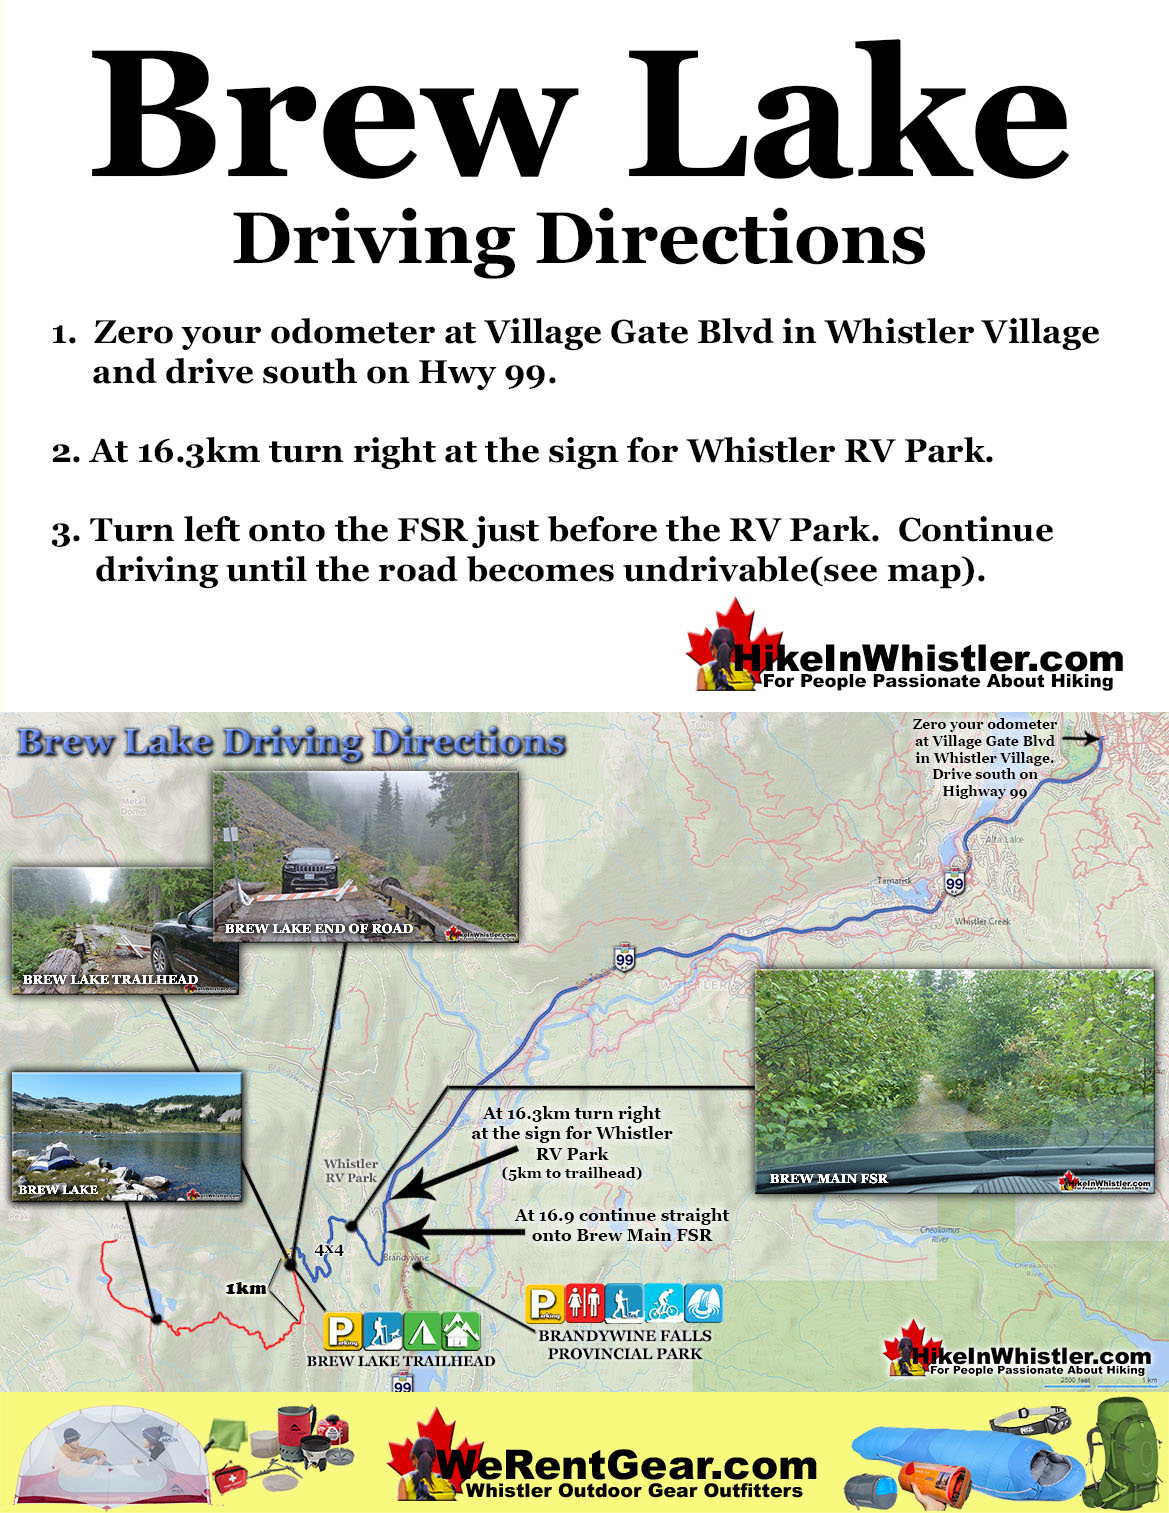 Brew Lake Driving Directions Map v3